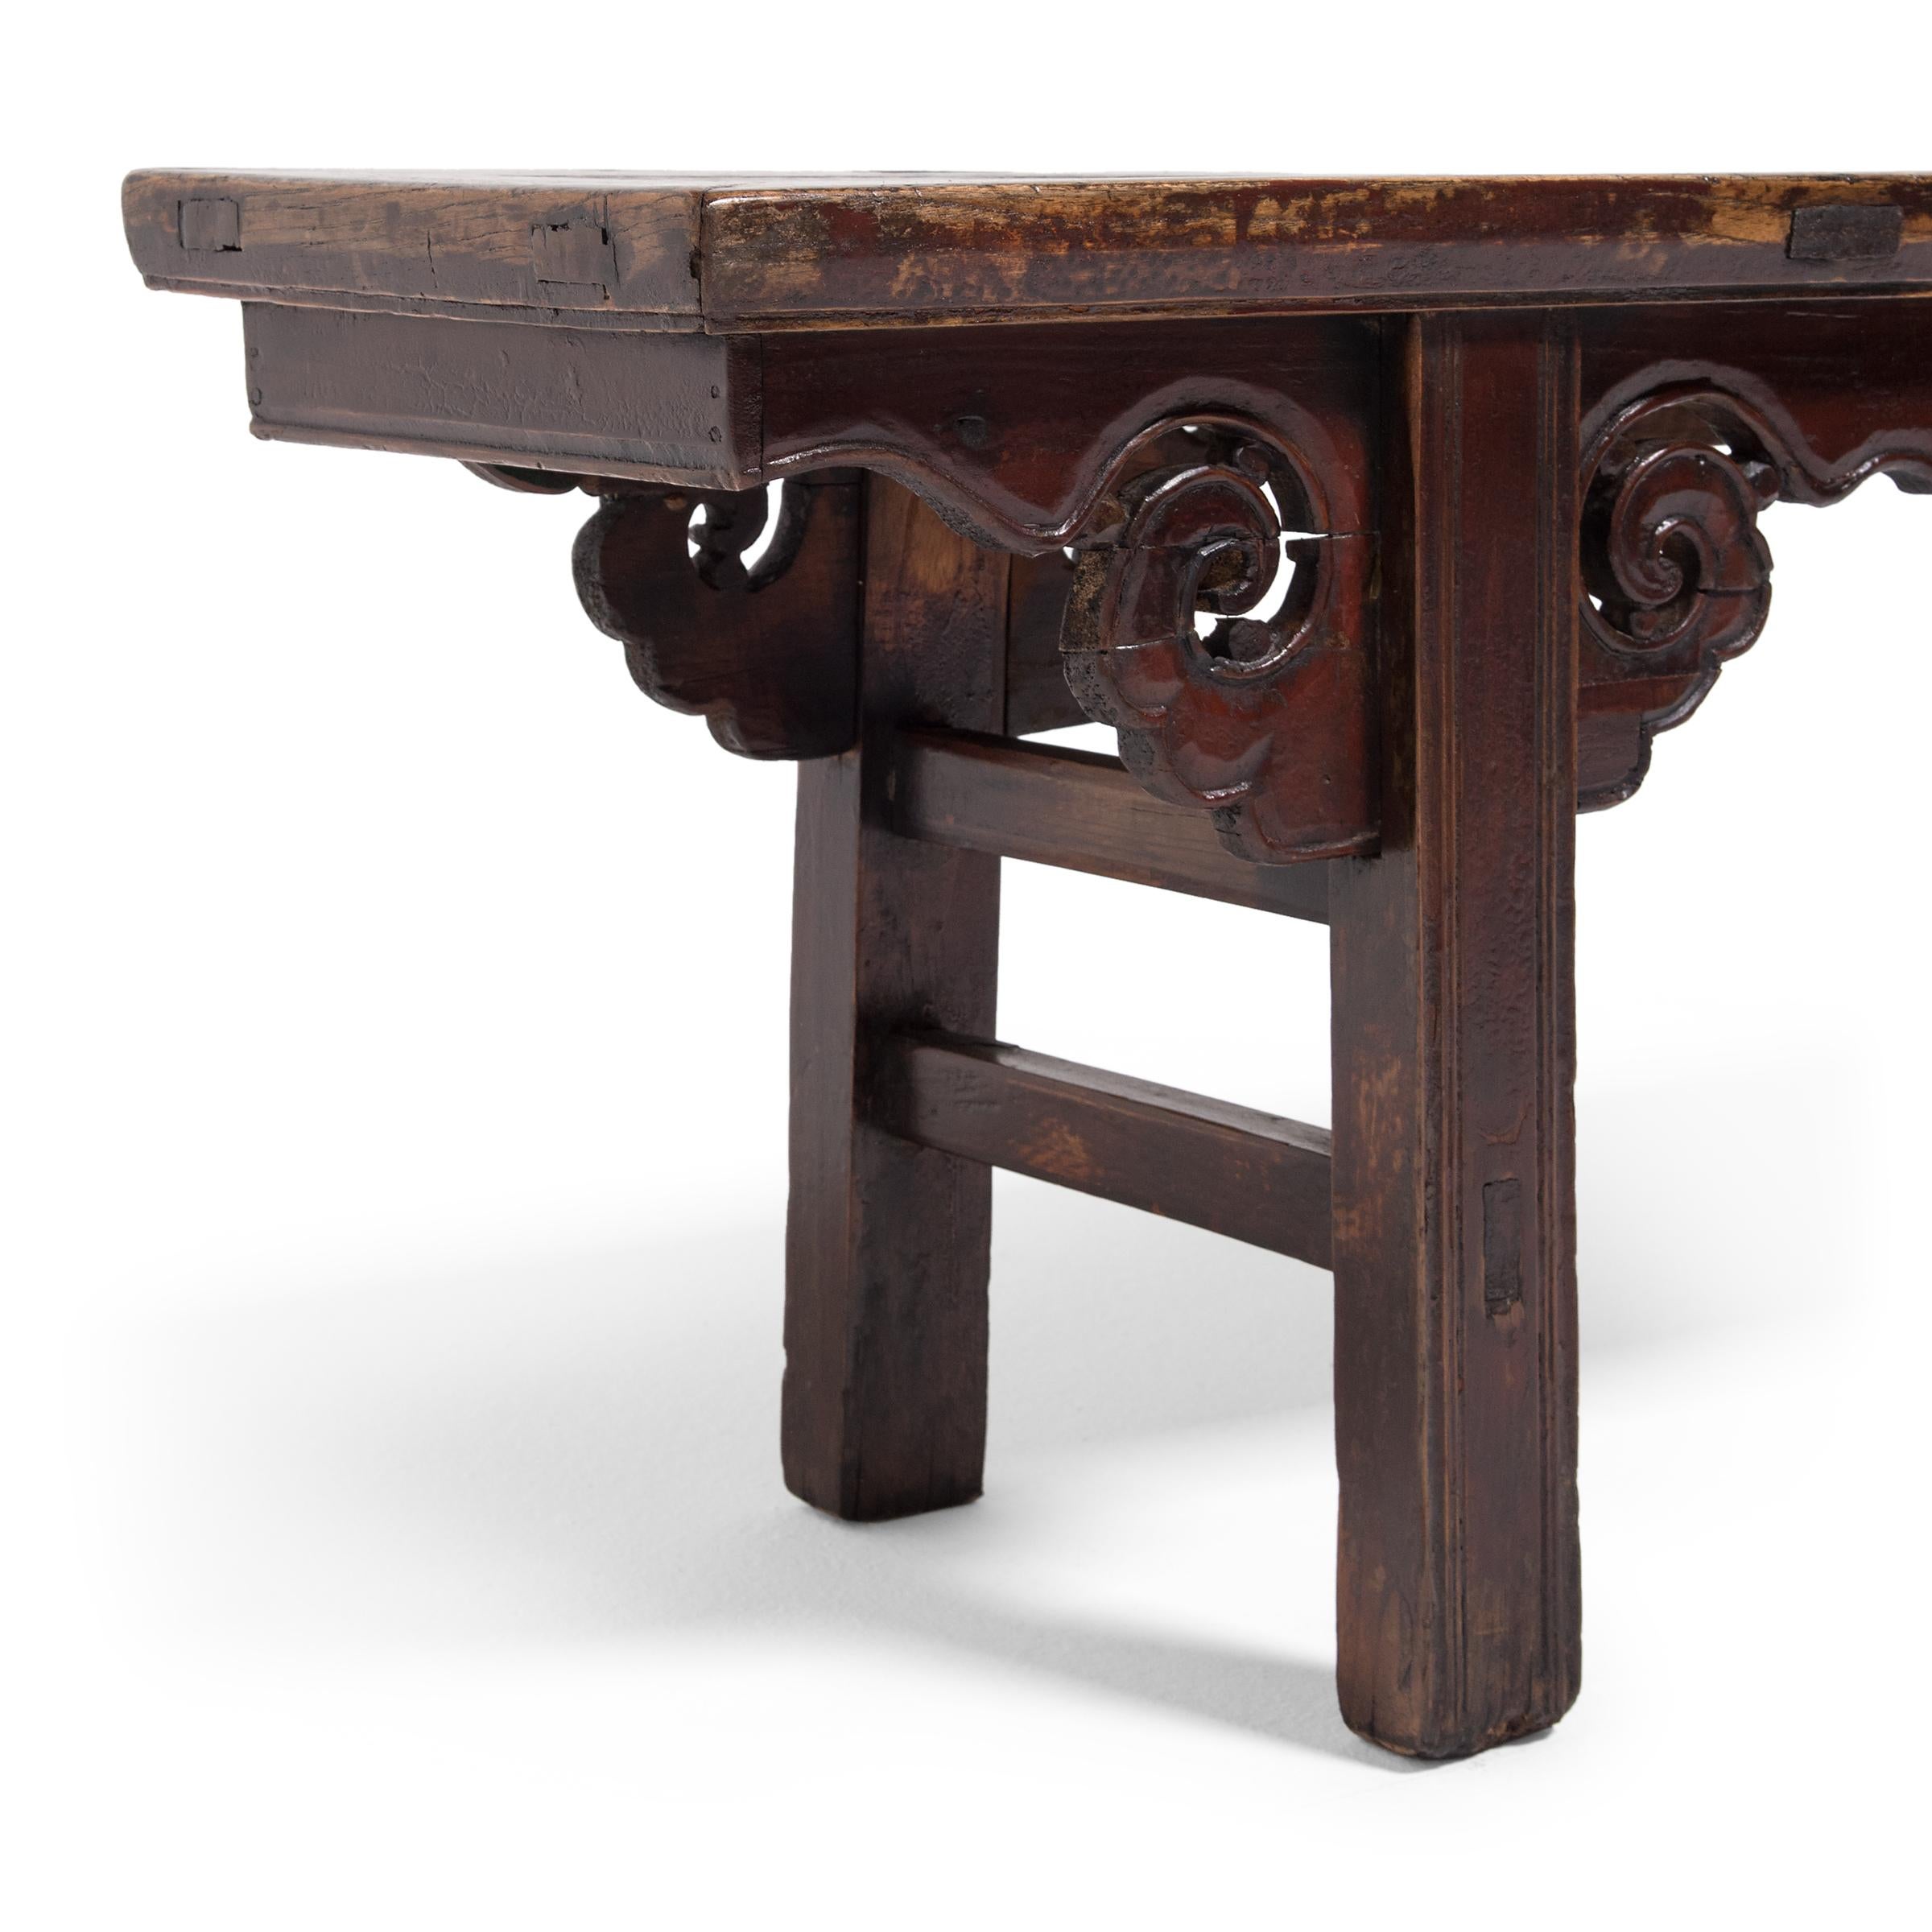 Elm Chinese Recessed Leg Bench with Cloud Spandrels, c. 1900